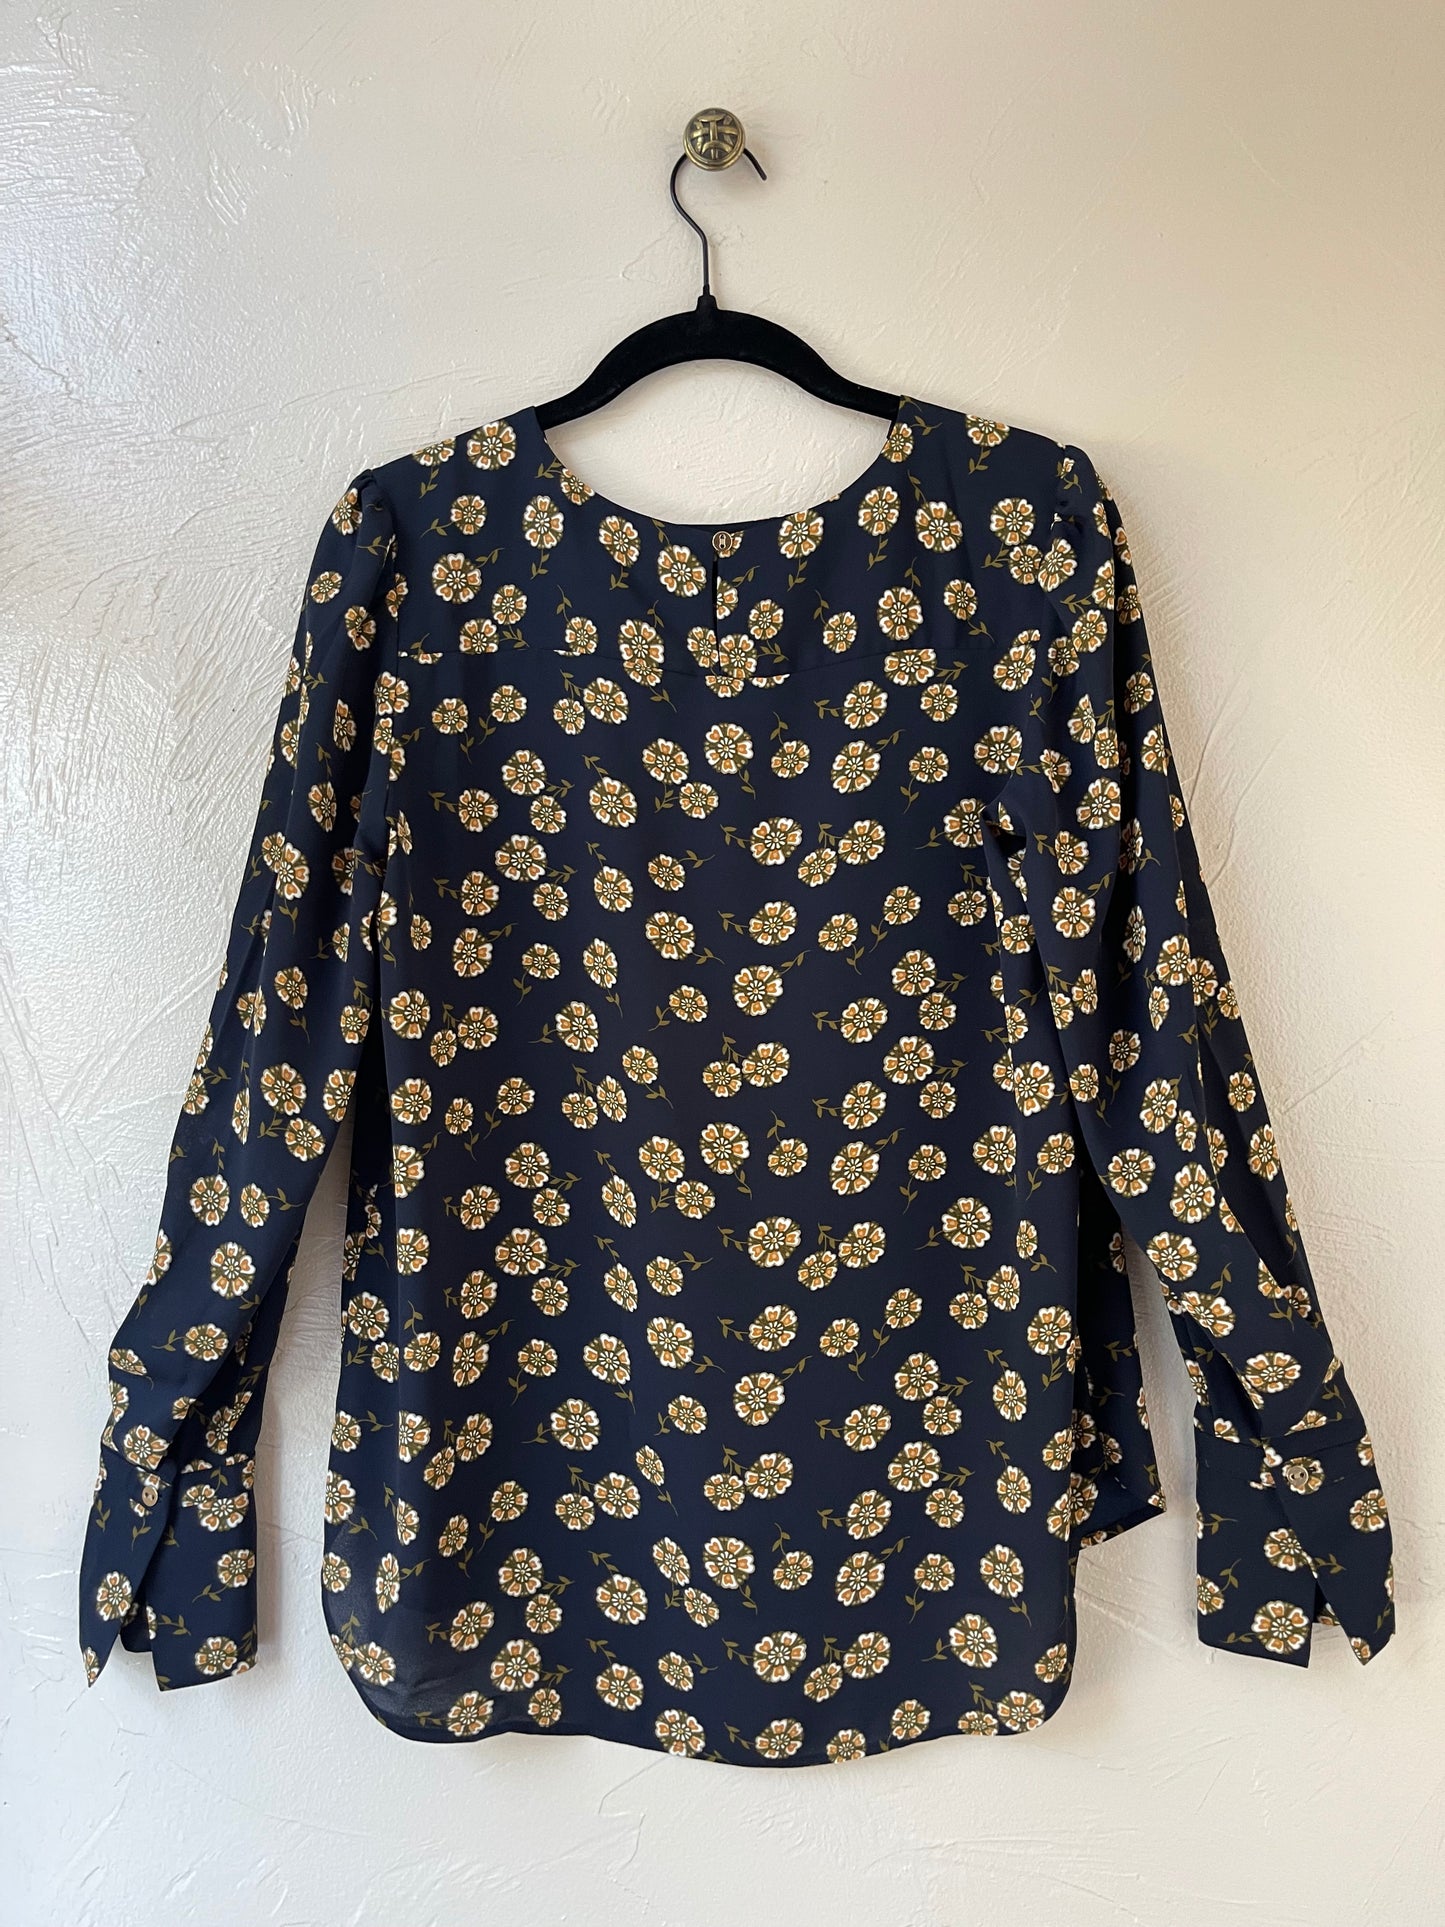 Olive and mustard floral blouse